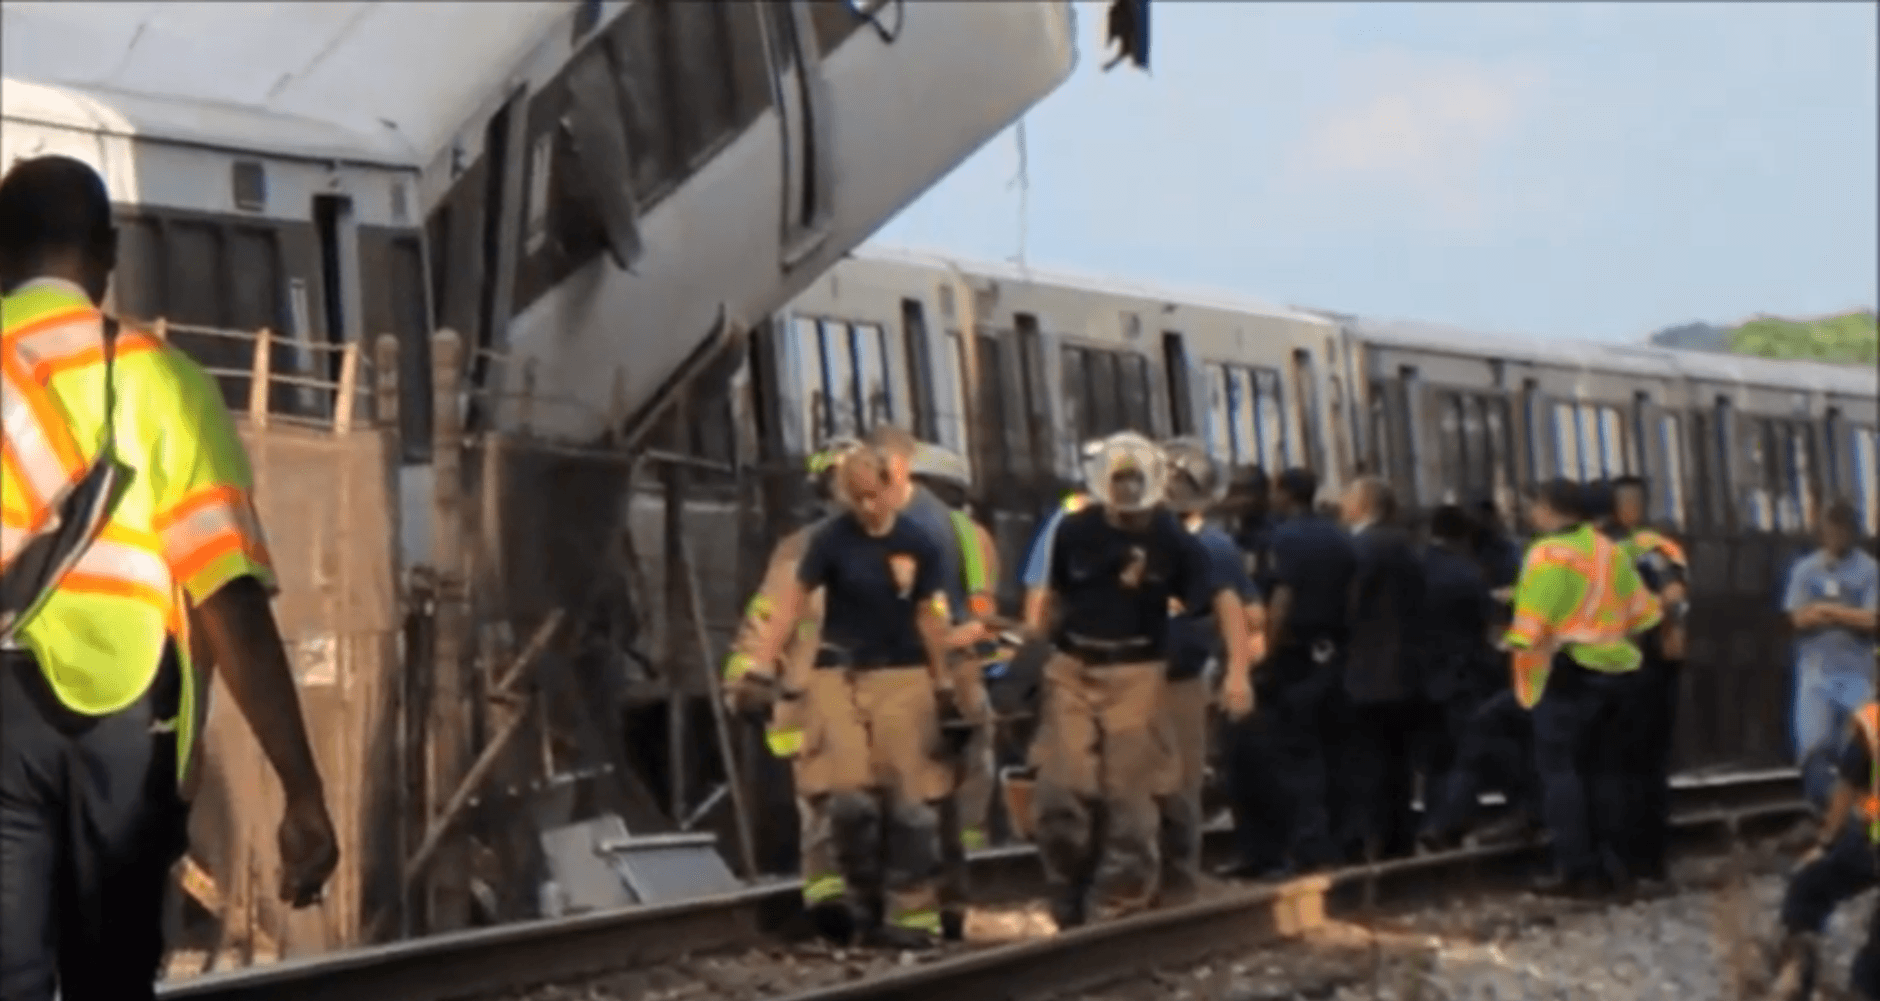 A screenshot from a DC Fire and EMS documentary shows crews  responding to a crash on the Red Line on June 22, 2009. (Courtesy DC Fire and EMS)